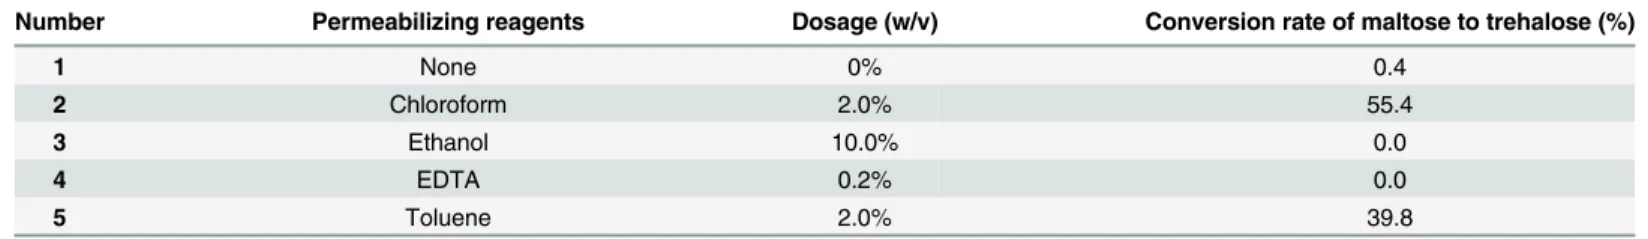 Table 1. Effects of permeabilization treatment on the conversion rate of maltose to trehalose by various reagents.